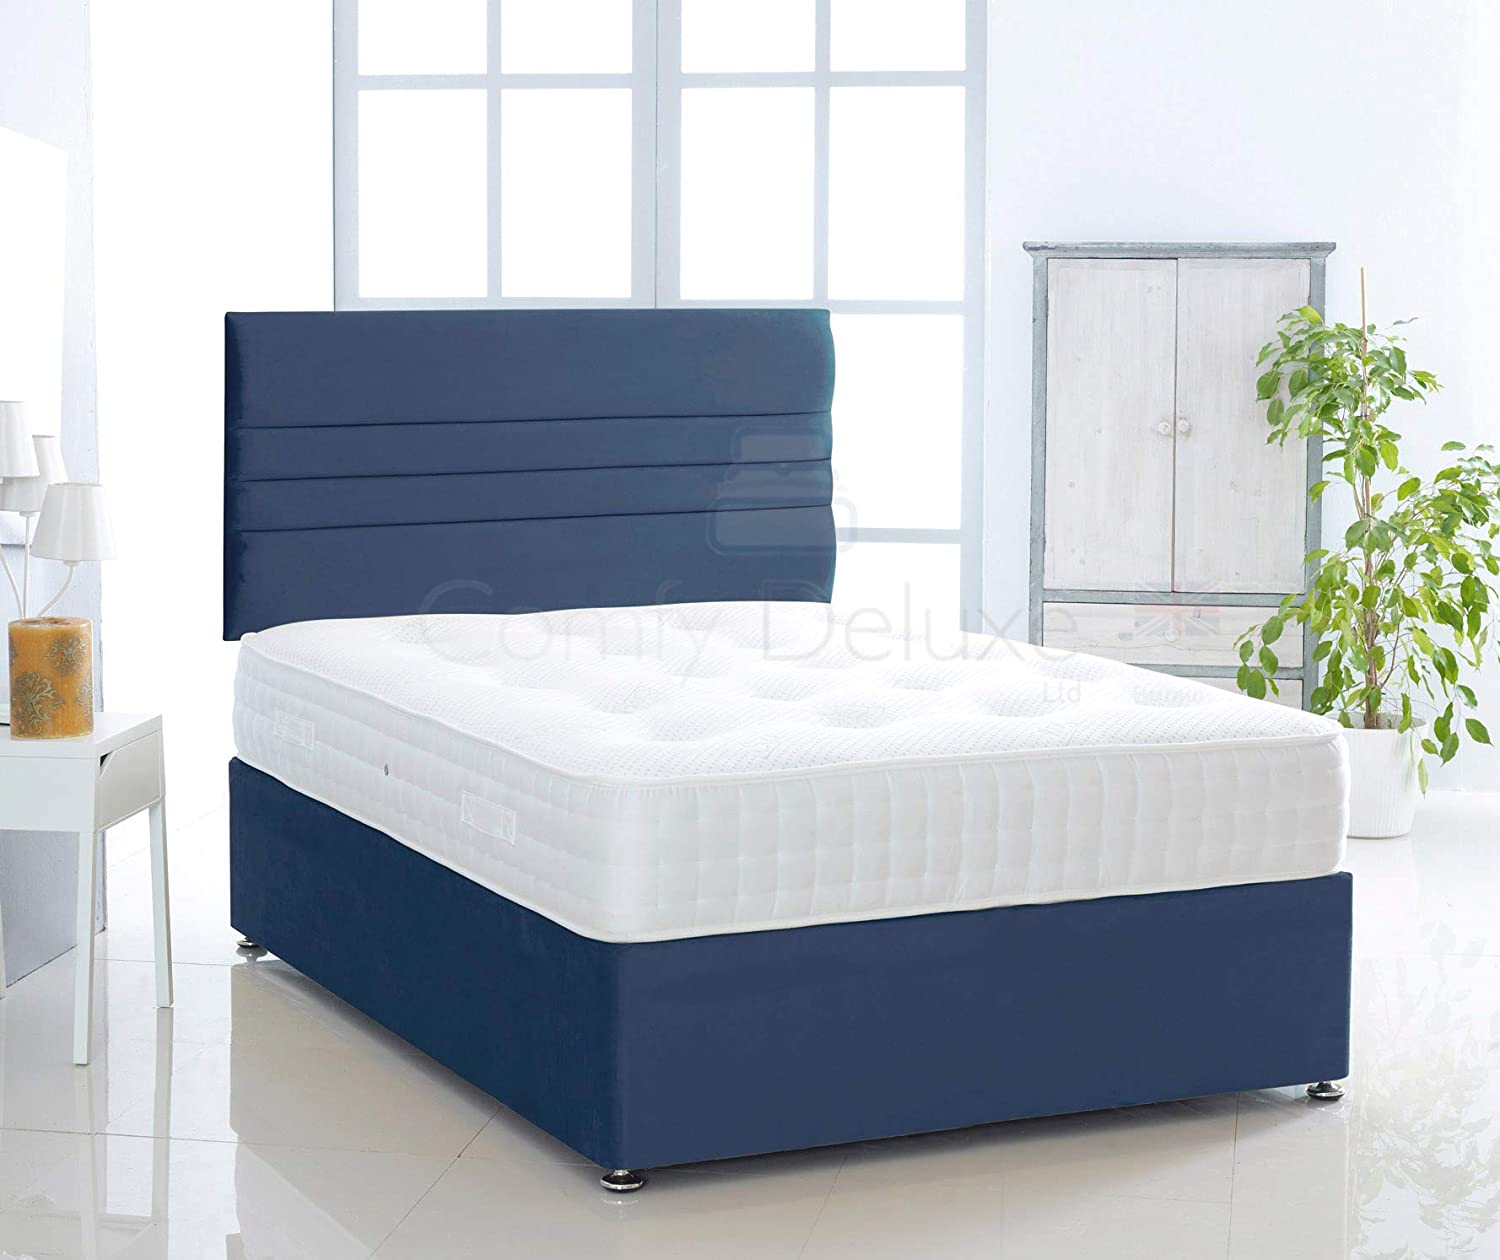 Blue-Verona-Plush-Pocket-Divan-Bed-Set-Lined-Headboard-Storage-Drawers-Faux-Leather-Chenille-Soft-Velvet-Lined-Headboard-Pocket-Mattress-Soft-Firm-Medium-Firm-Glides